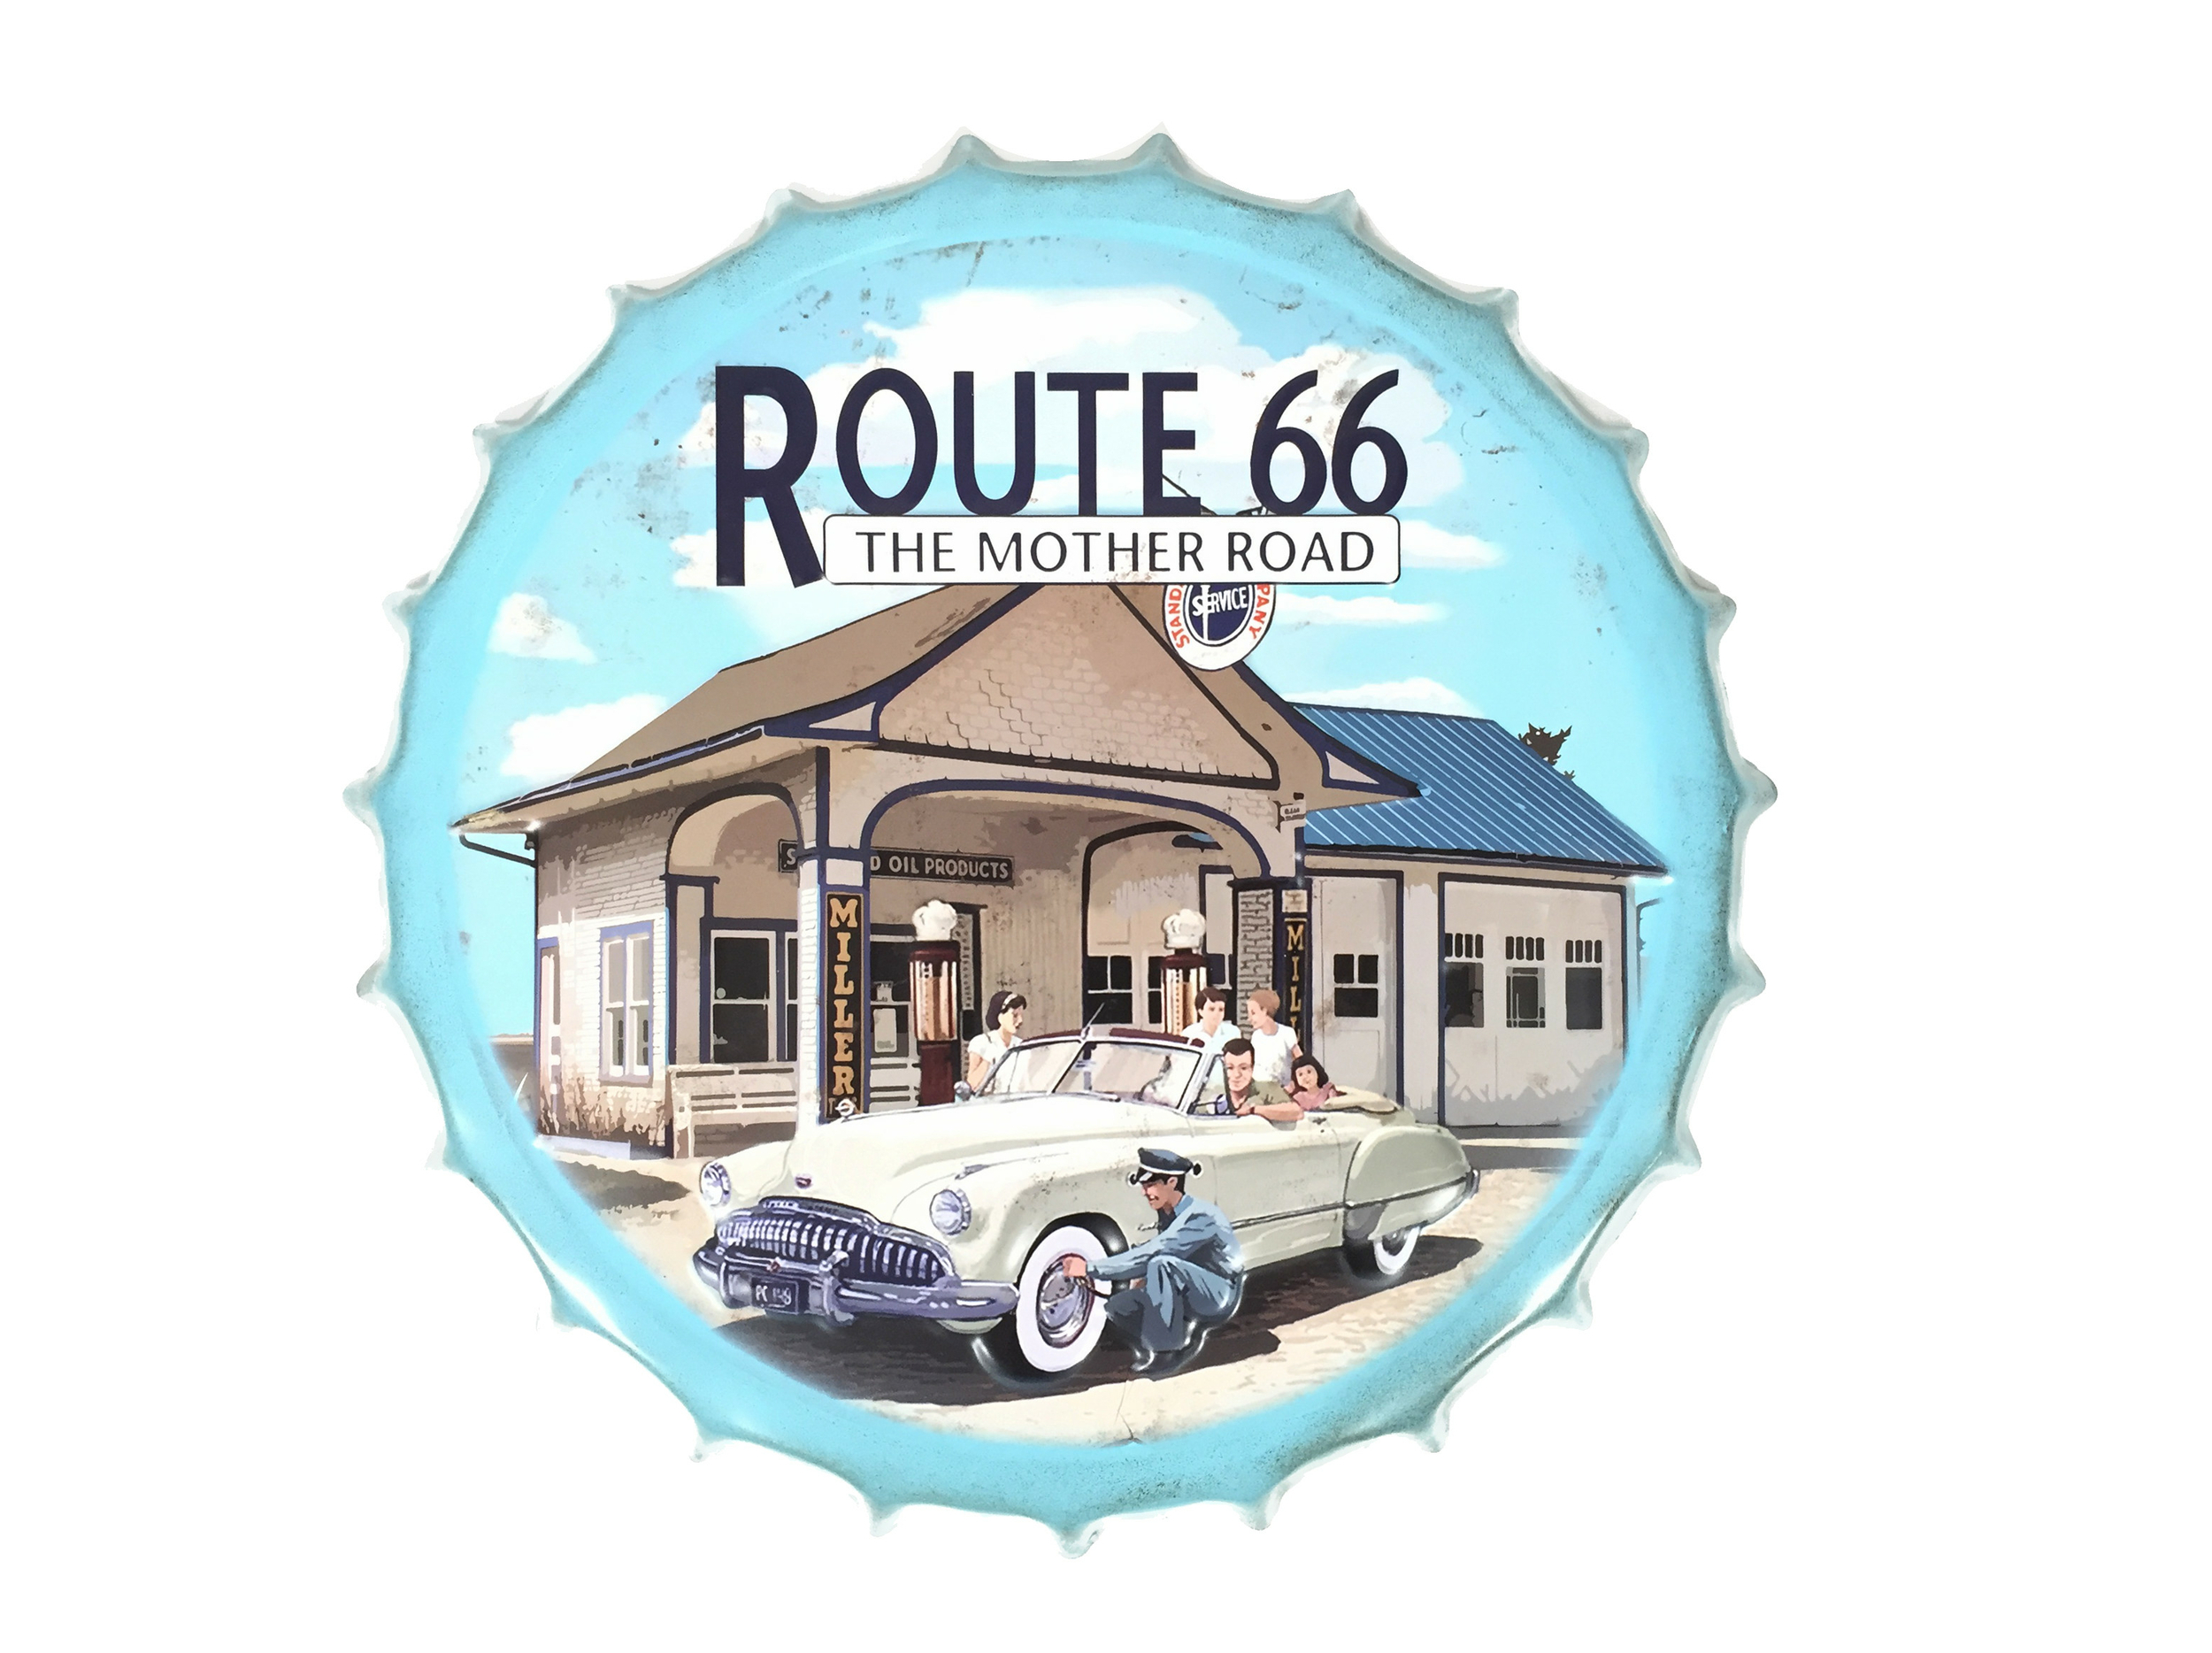 capsule vintage route 66 mother road